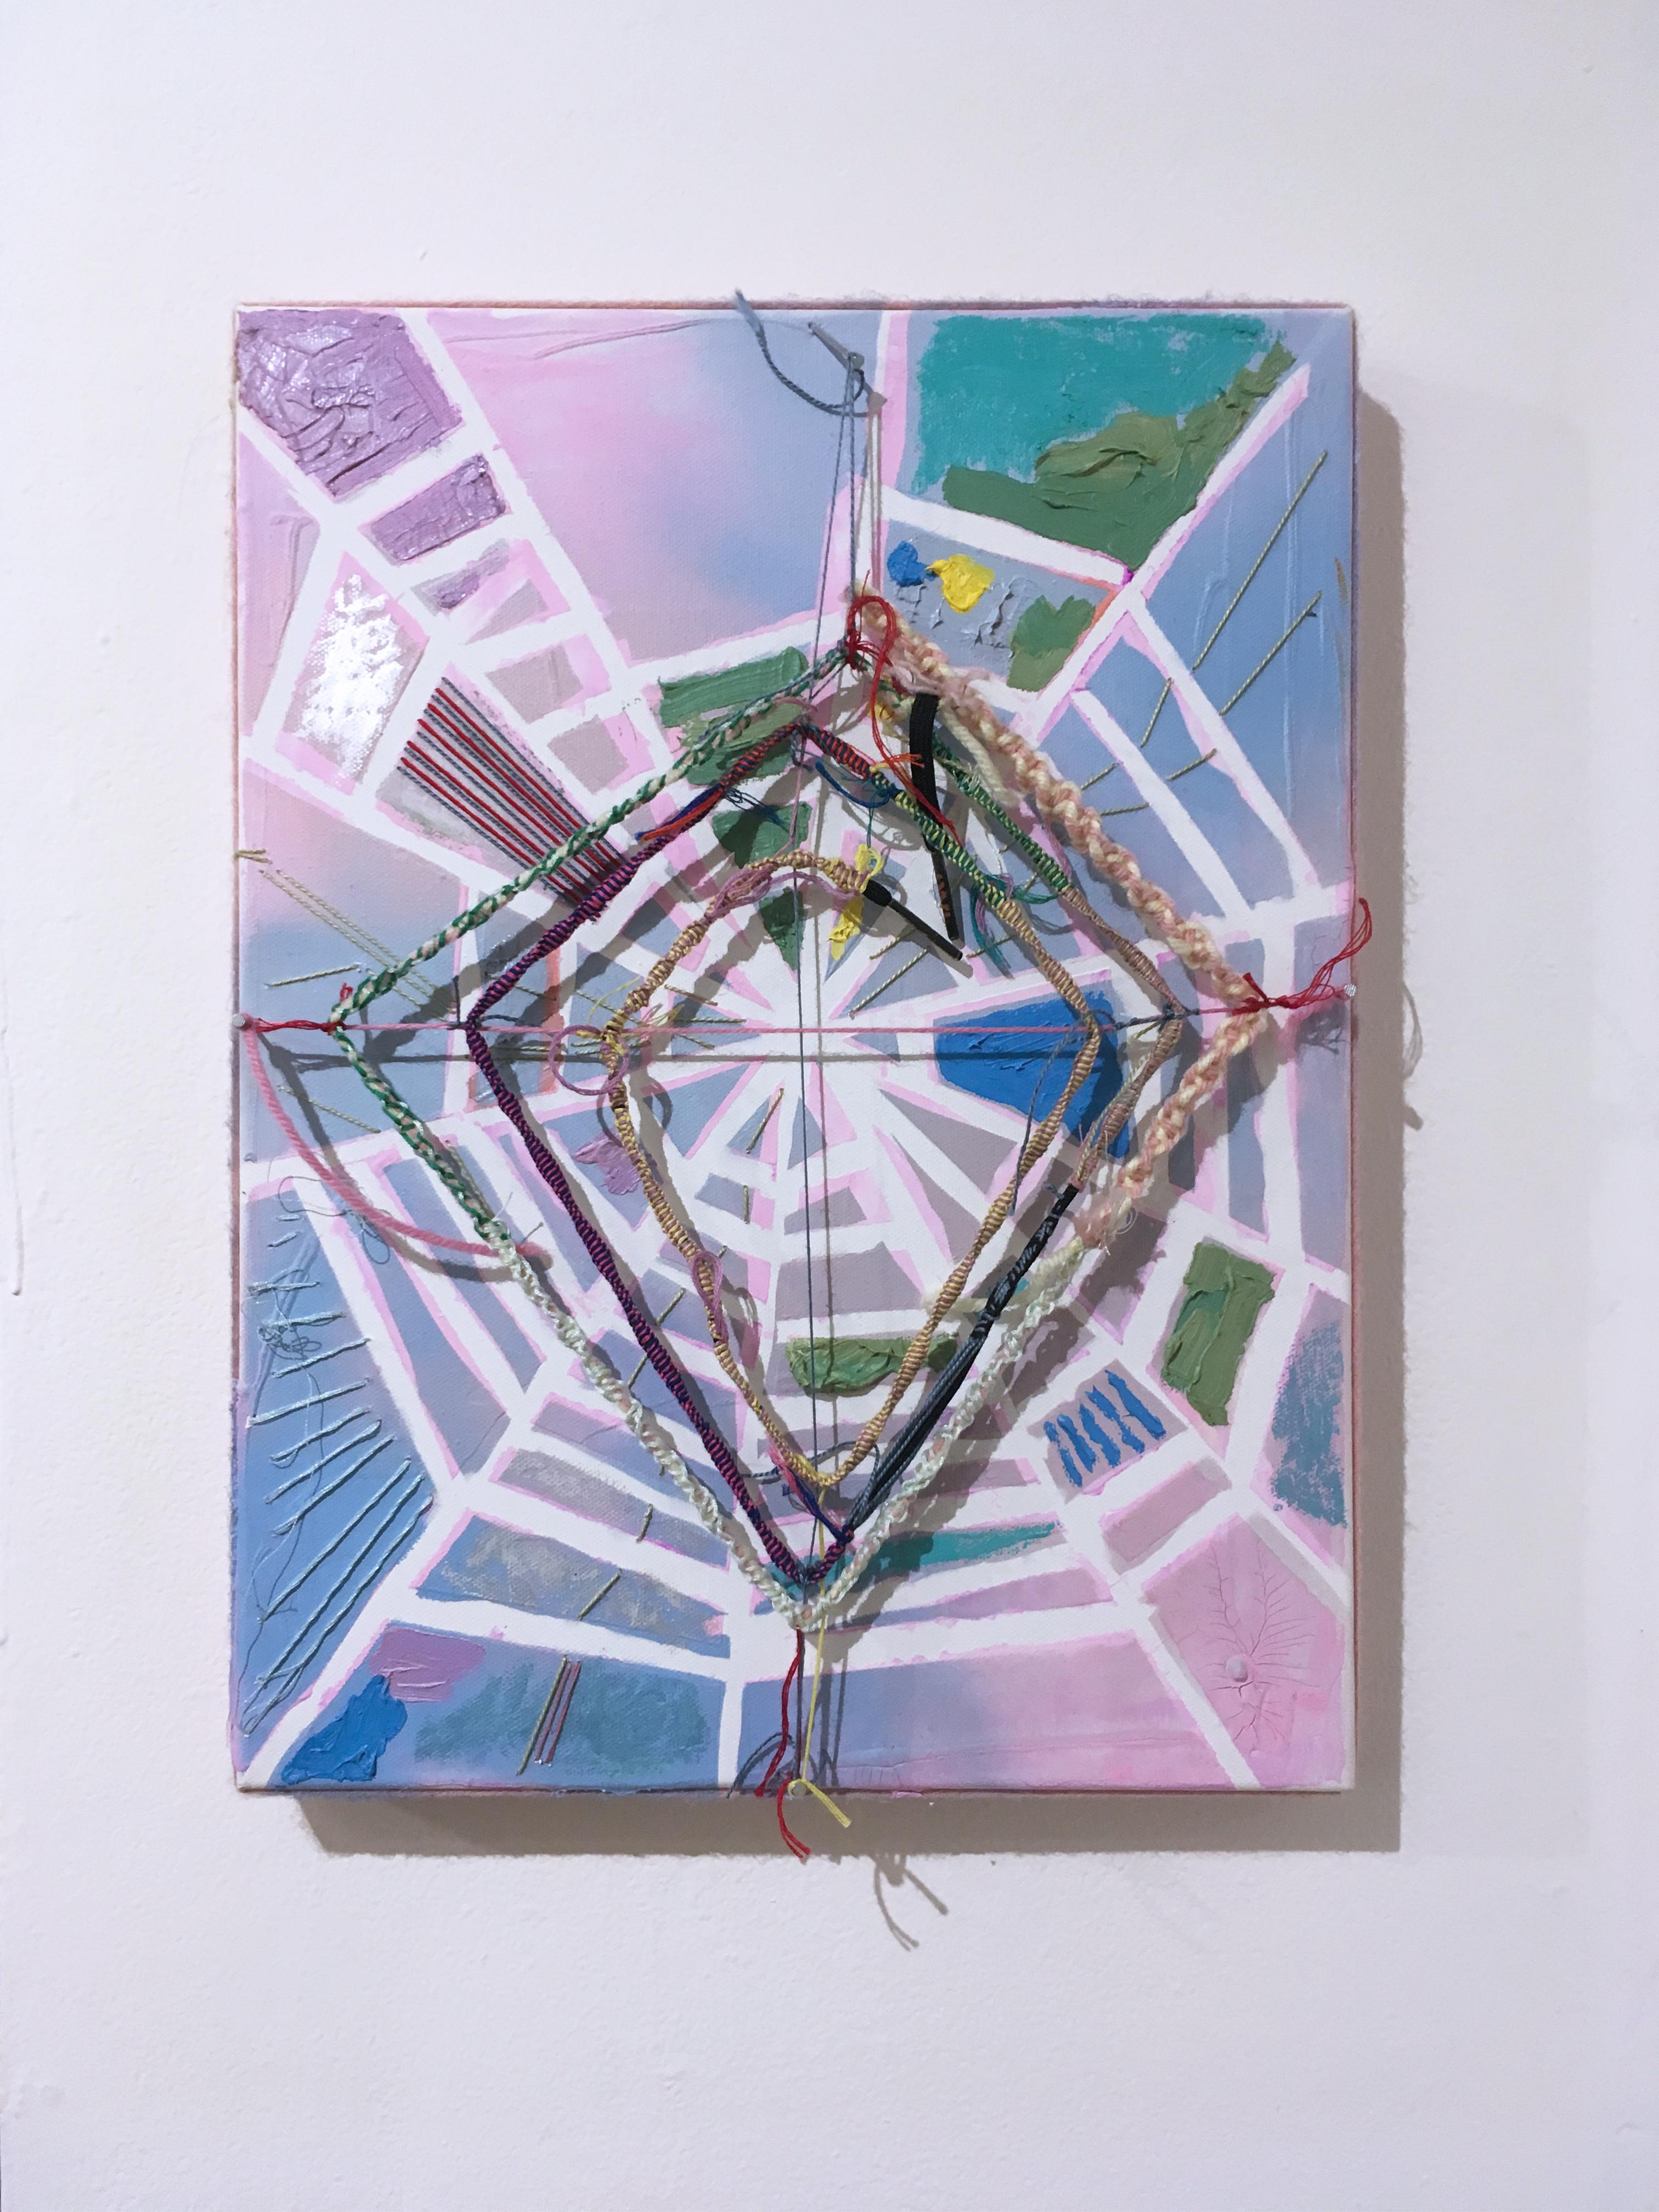 Little Pink Web, 2020, acrylic, oil, pastel, panel, blue, pink, abstract, yarn - Contemporary Mixed Media Art by Macauley Norman